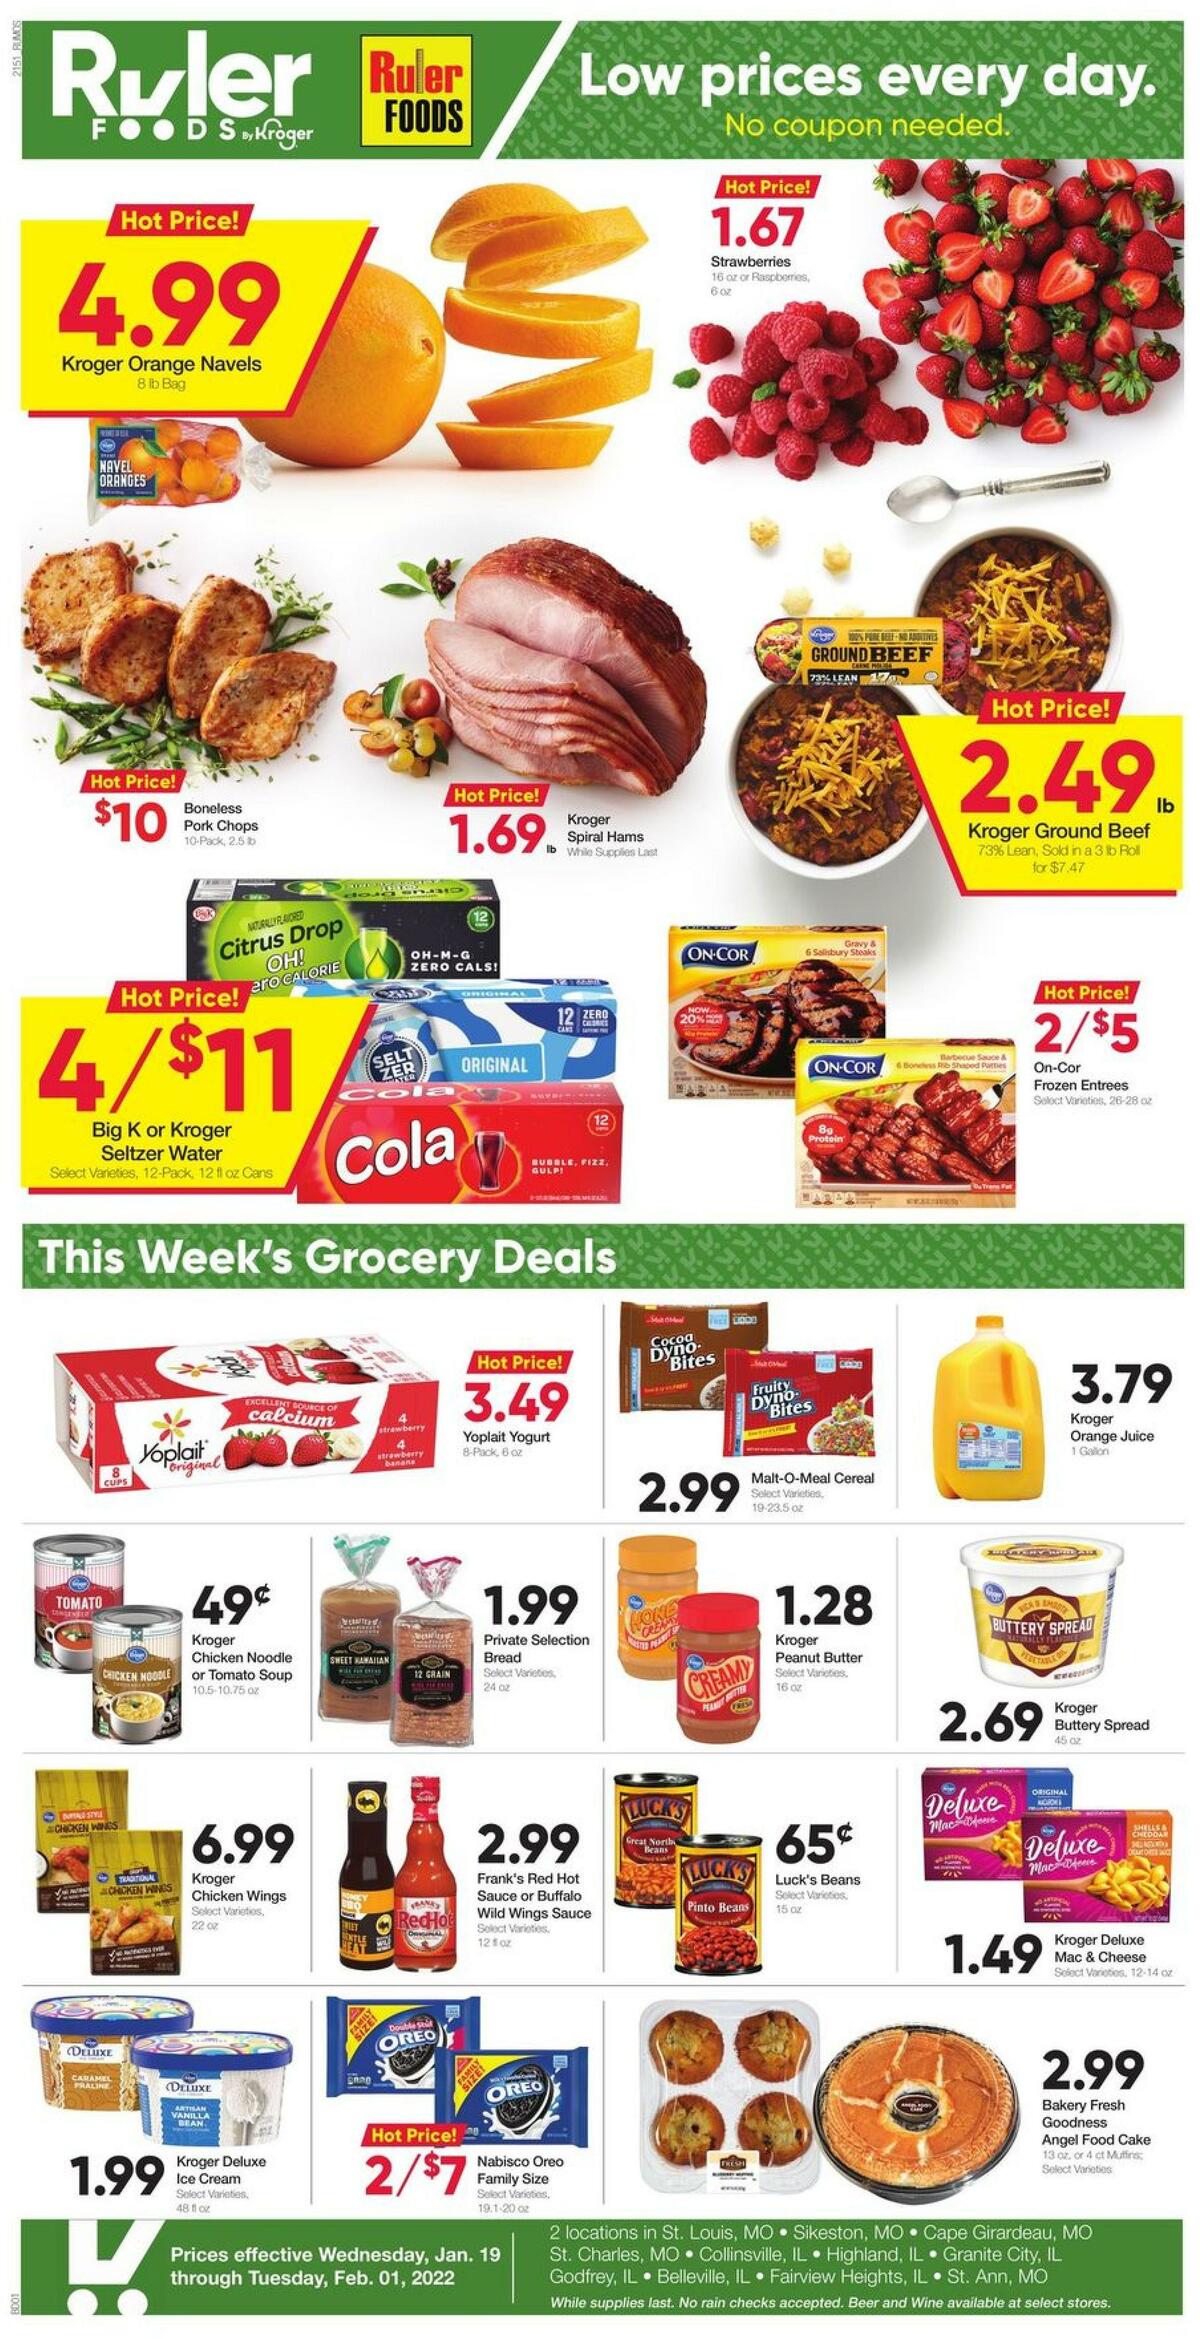 Ruler Foods Weekly Ad from January 19